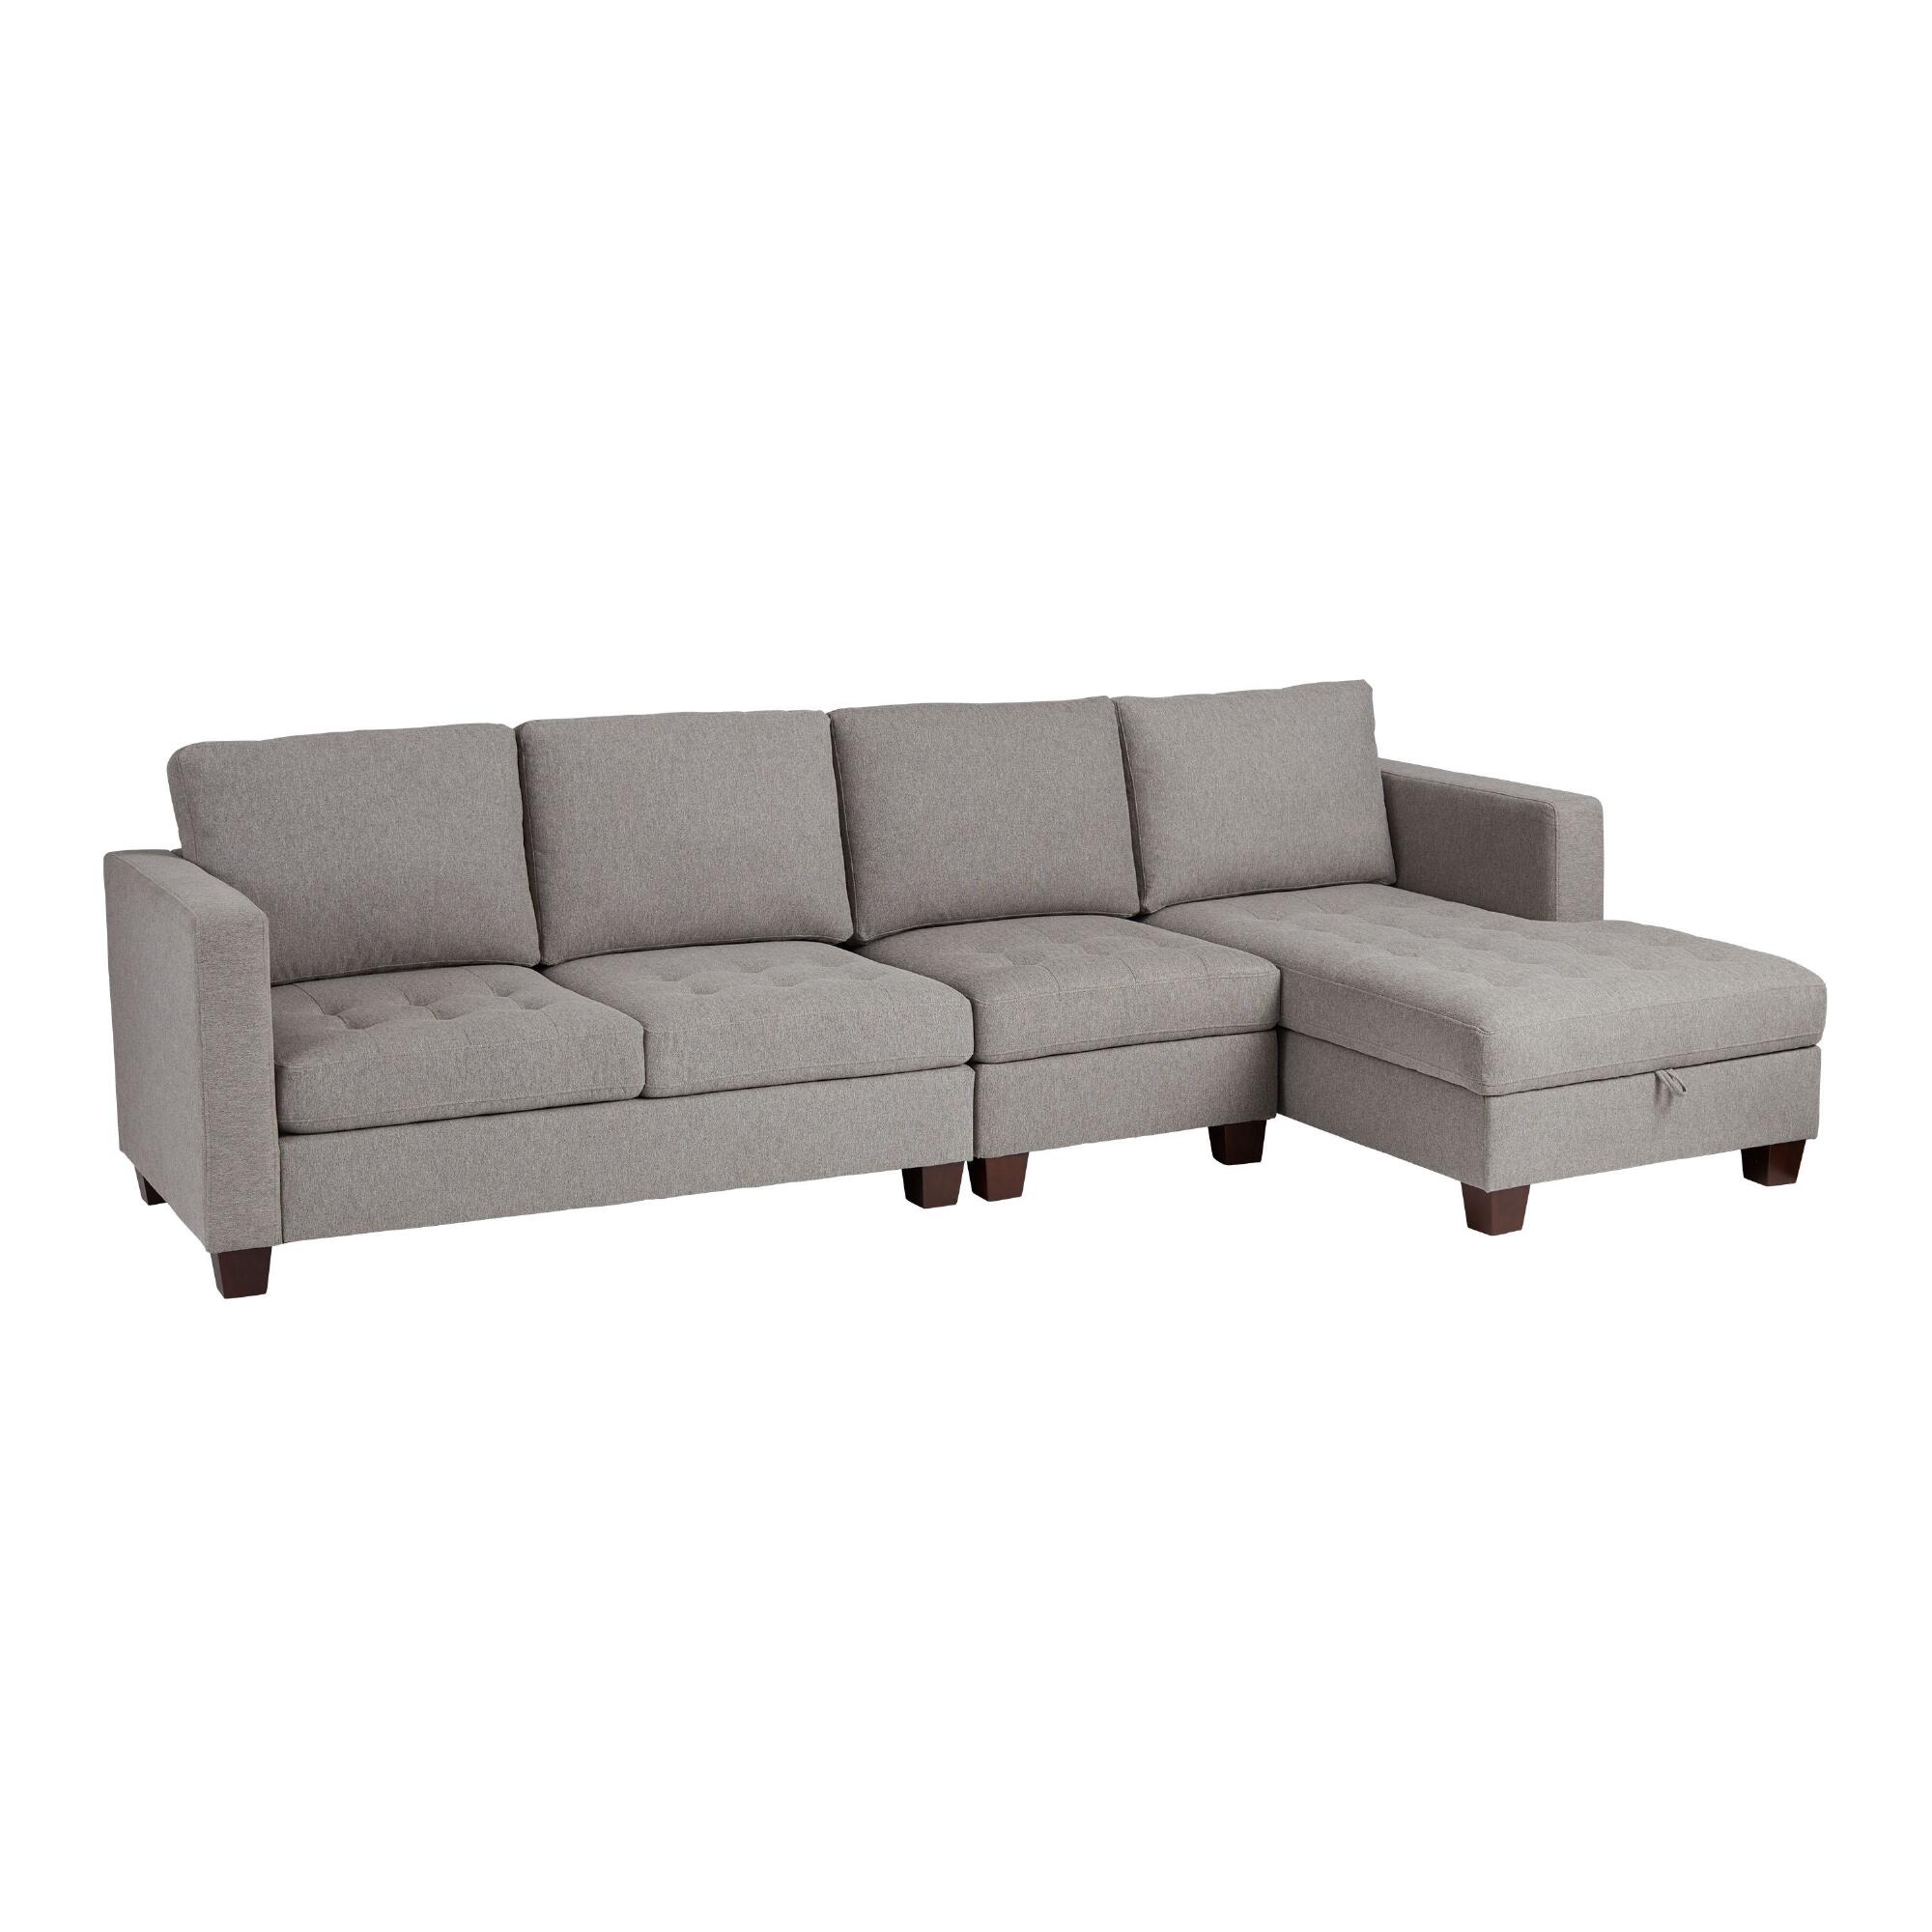 Gray Right Facing Trudeau 3 Piece Sectional Sofa by World Market